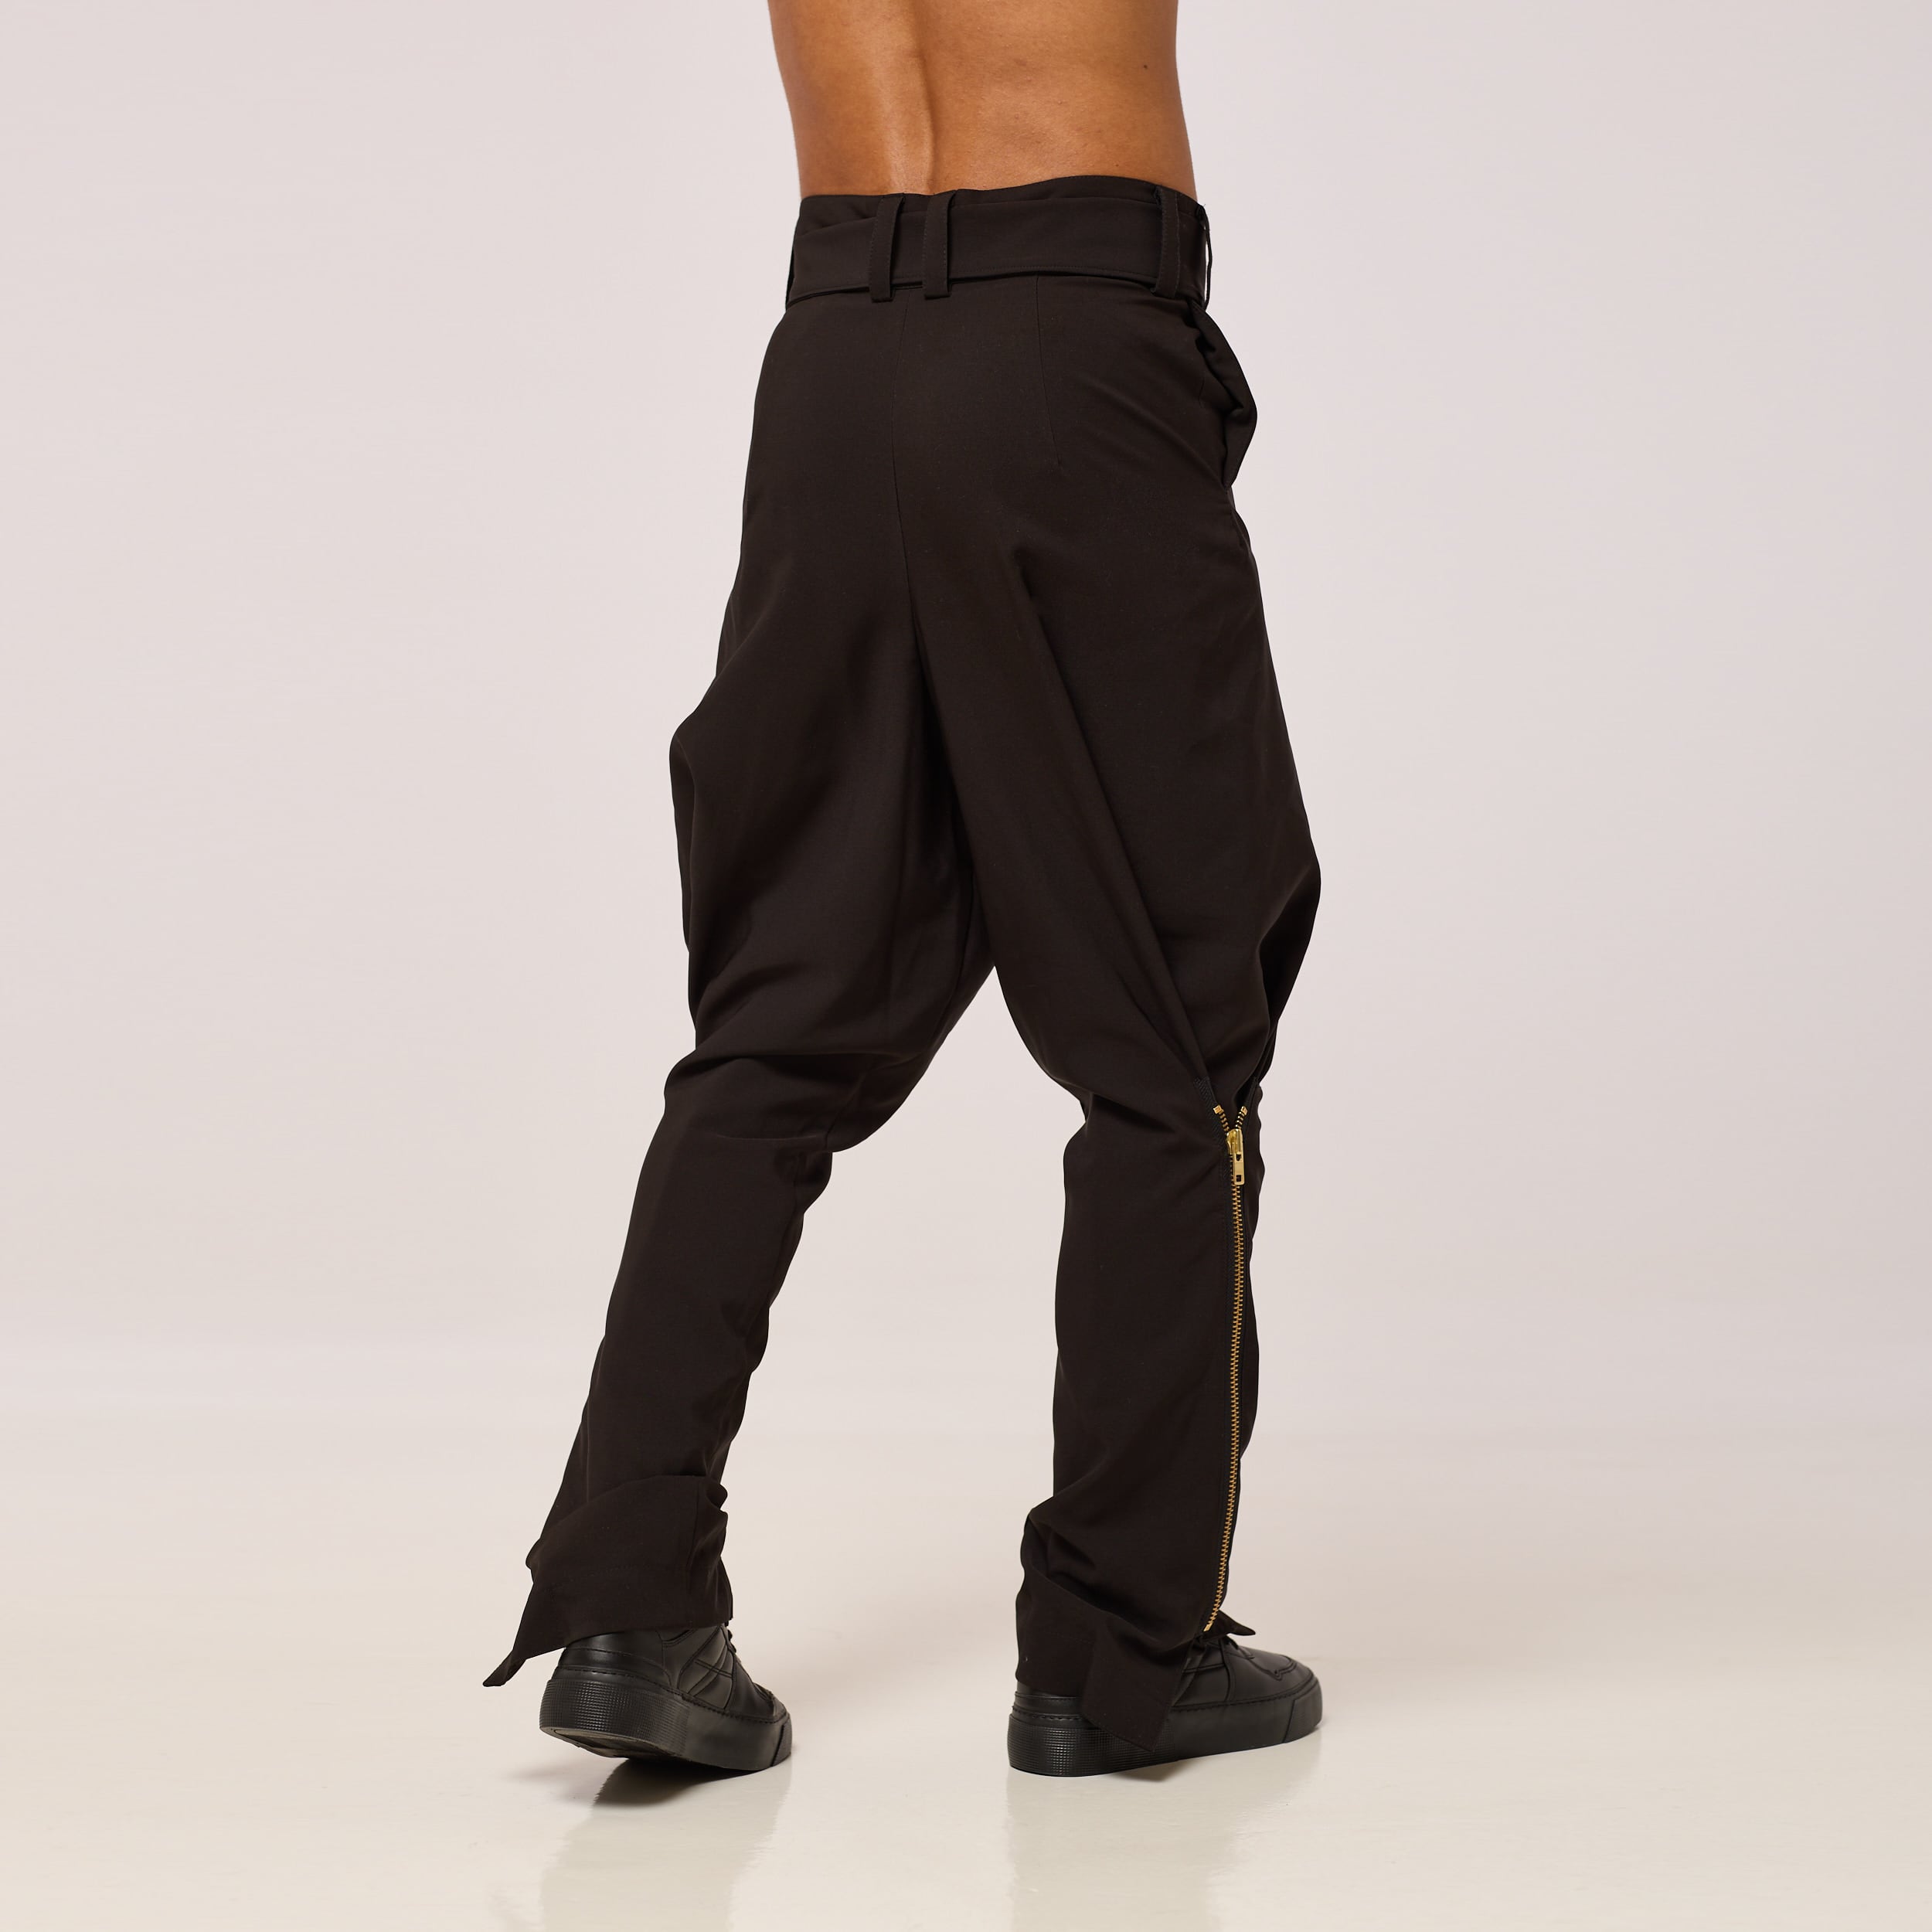 ZERØ London - Back full length view. Mens zero waste tapered trouser with gold zips designed & made in London